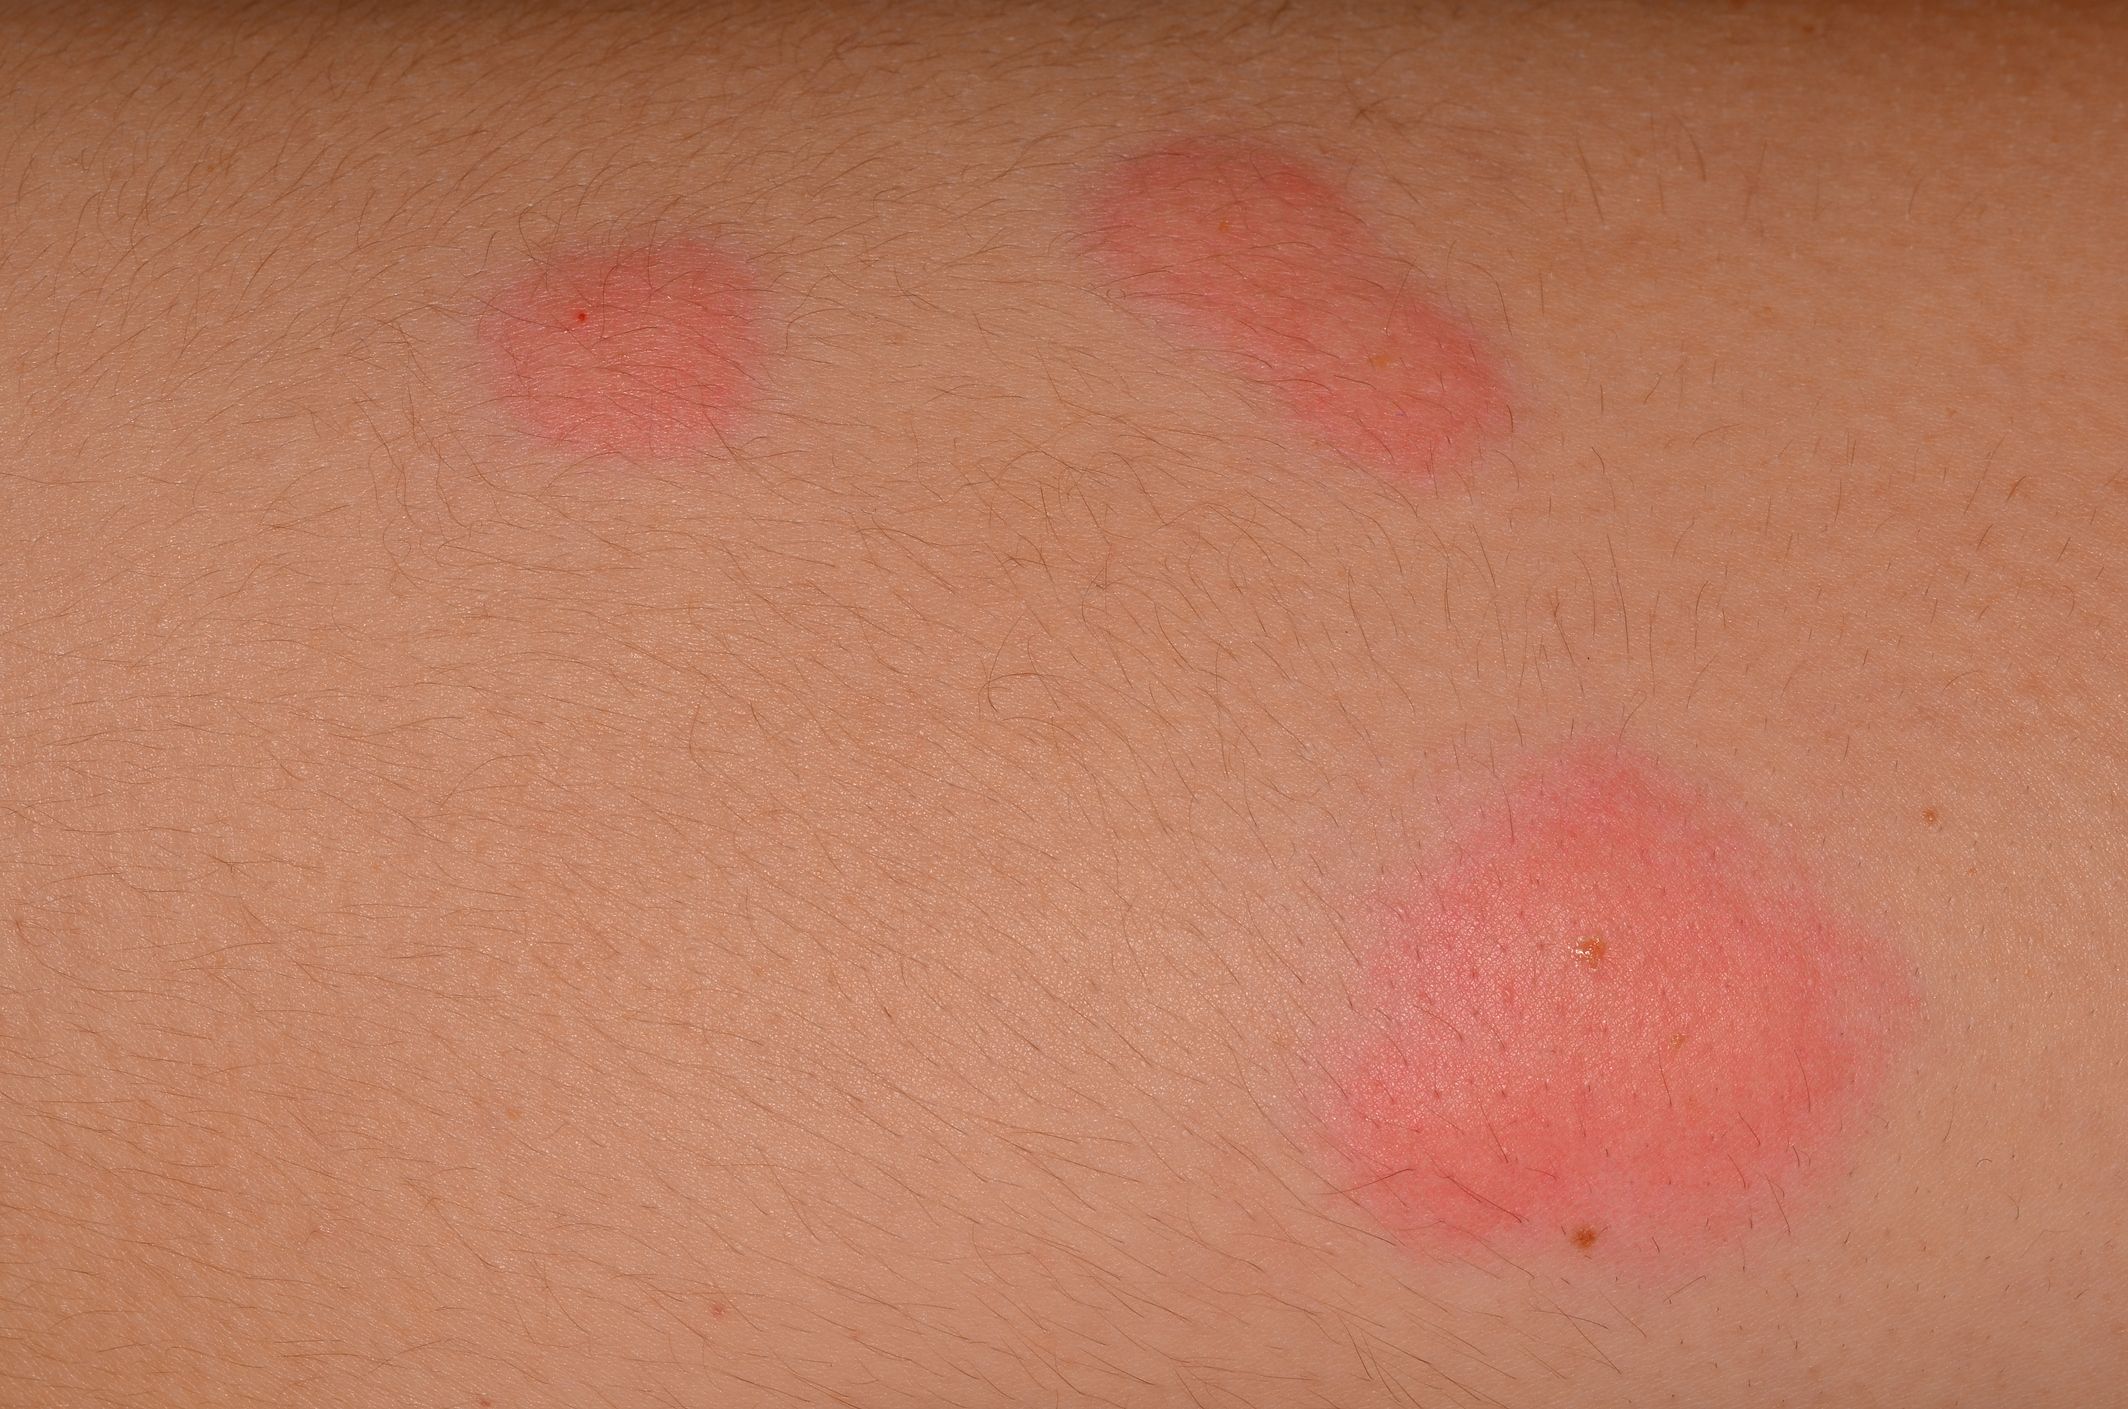 bug bites that itch burn and swell